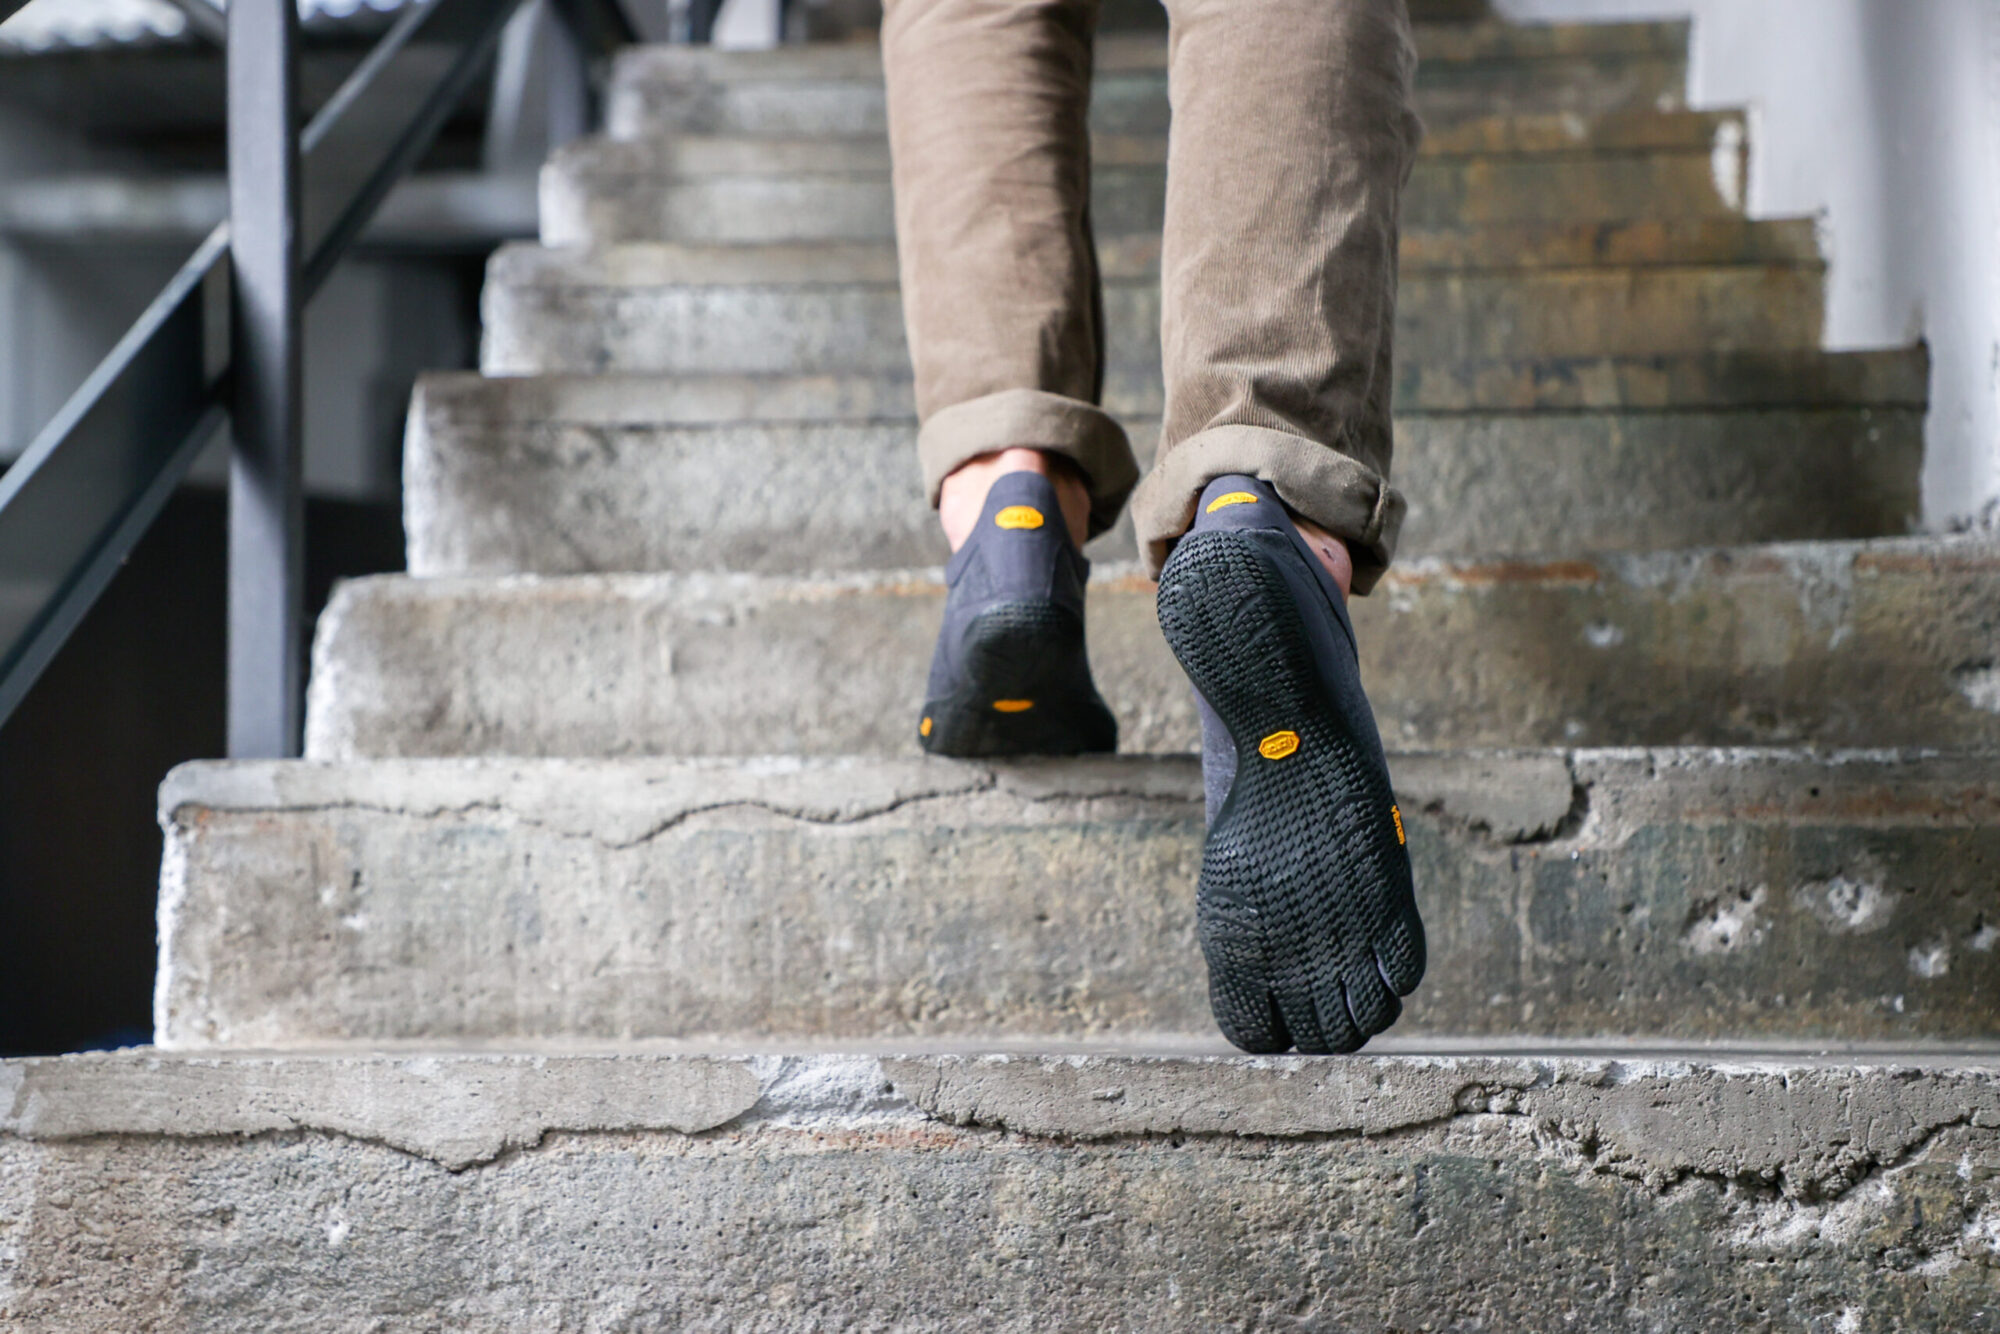 Vibram Fivefingers, even more eco-friendly - The Pill Outdoor Journal